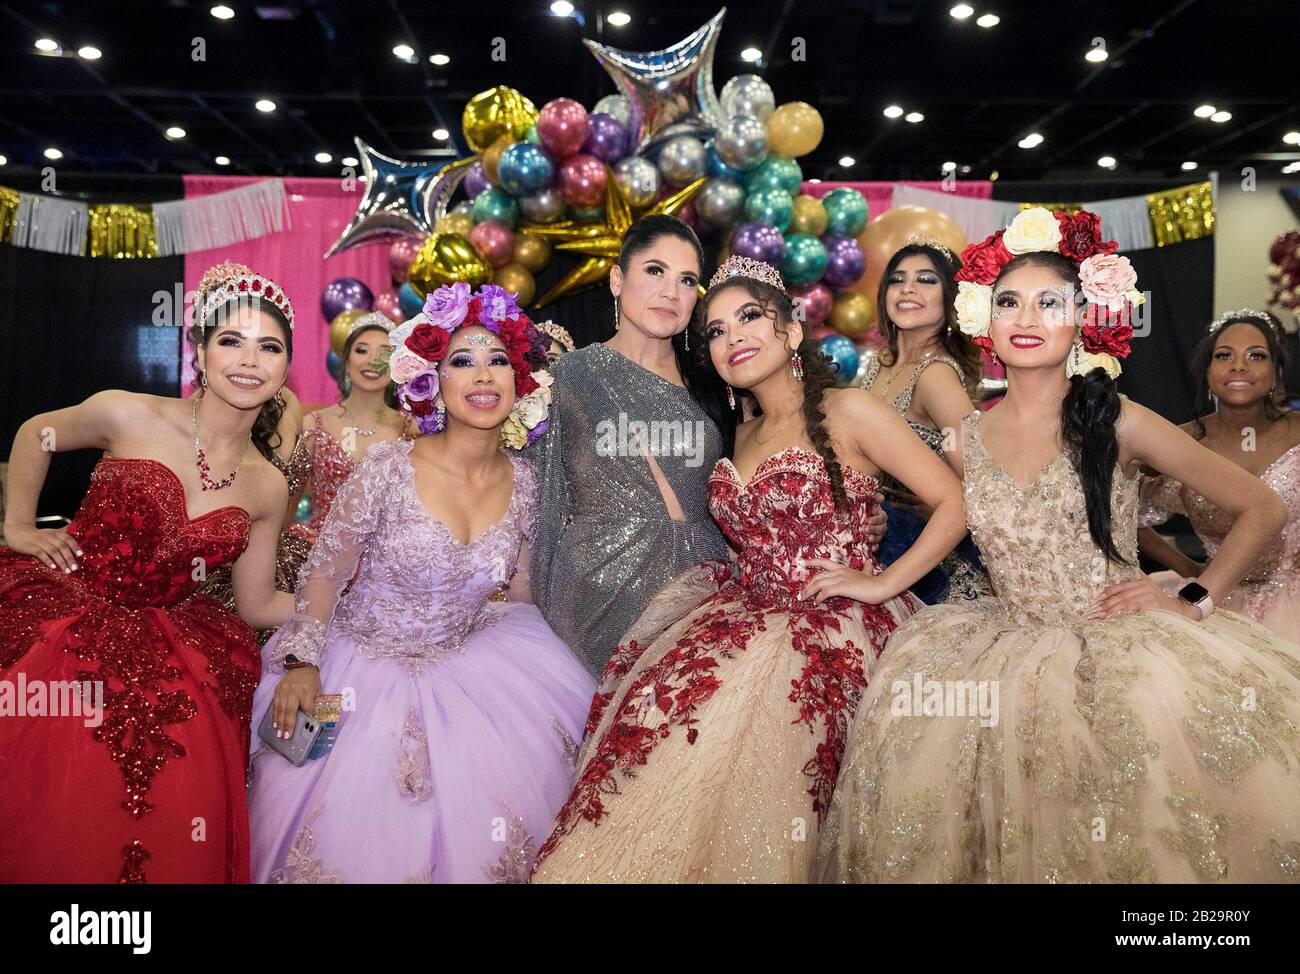 Houston, USA. 1st Mar, 2020. A Houston-based Quinceanera dress designer takes a photograph with her models at the Big One Quinceanera Expo in Houston, Texas, United States, on March 1, 2020. Quinceanera is a tradition in Latin America marking the transition of girls from childhood to adulthood. Credit: Yi-Chin Lee/Xinhua/Alamy Live News Stock Photo